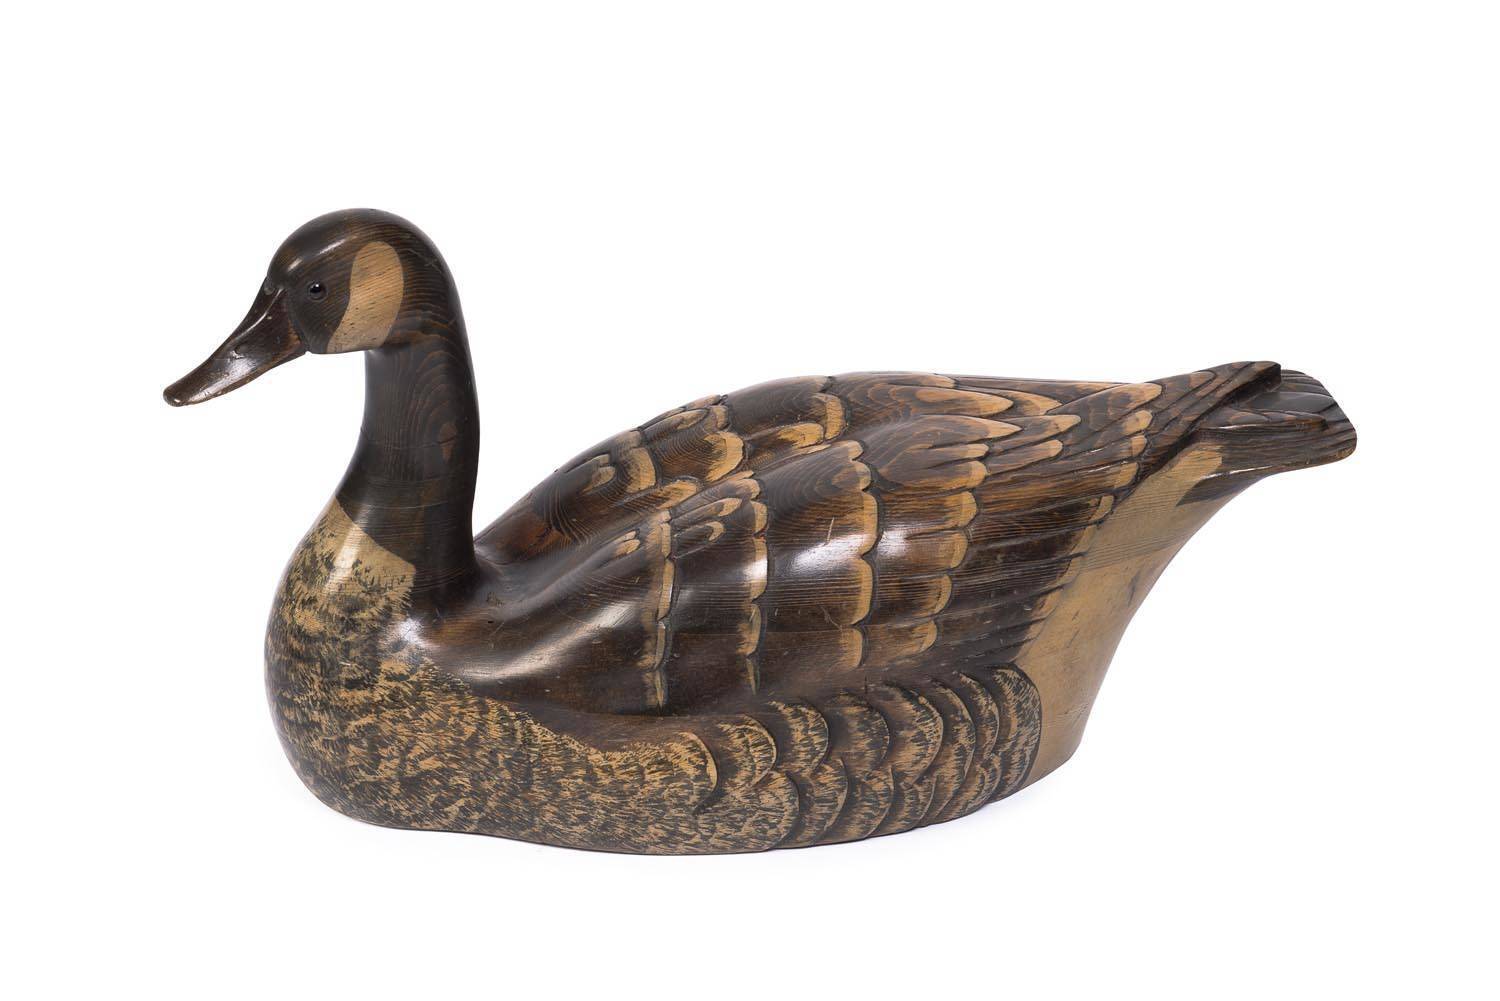 TOM TABER Decoy goose, carved and painted wood, signature on base. 59cm long